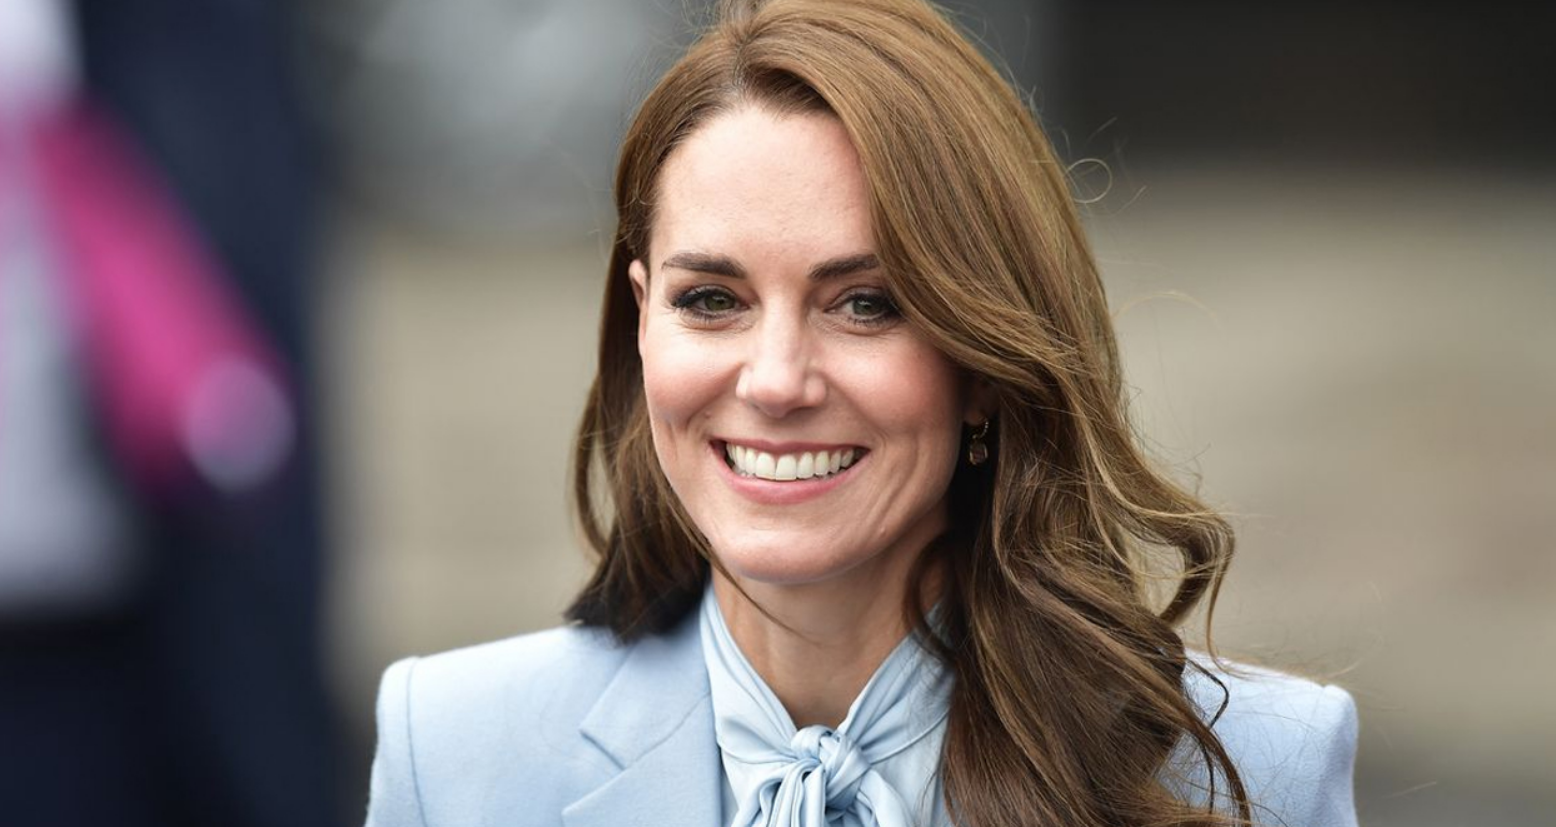 What does Kate Middleton eat that allows her to weigh only 55 kg at her age